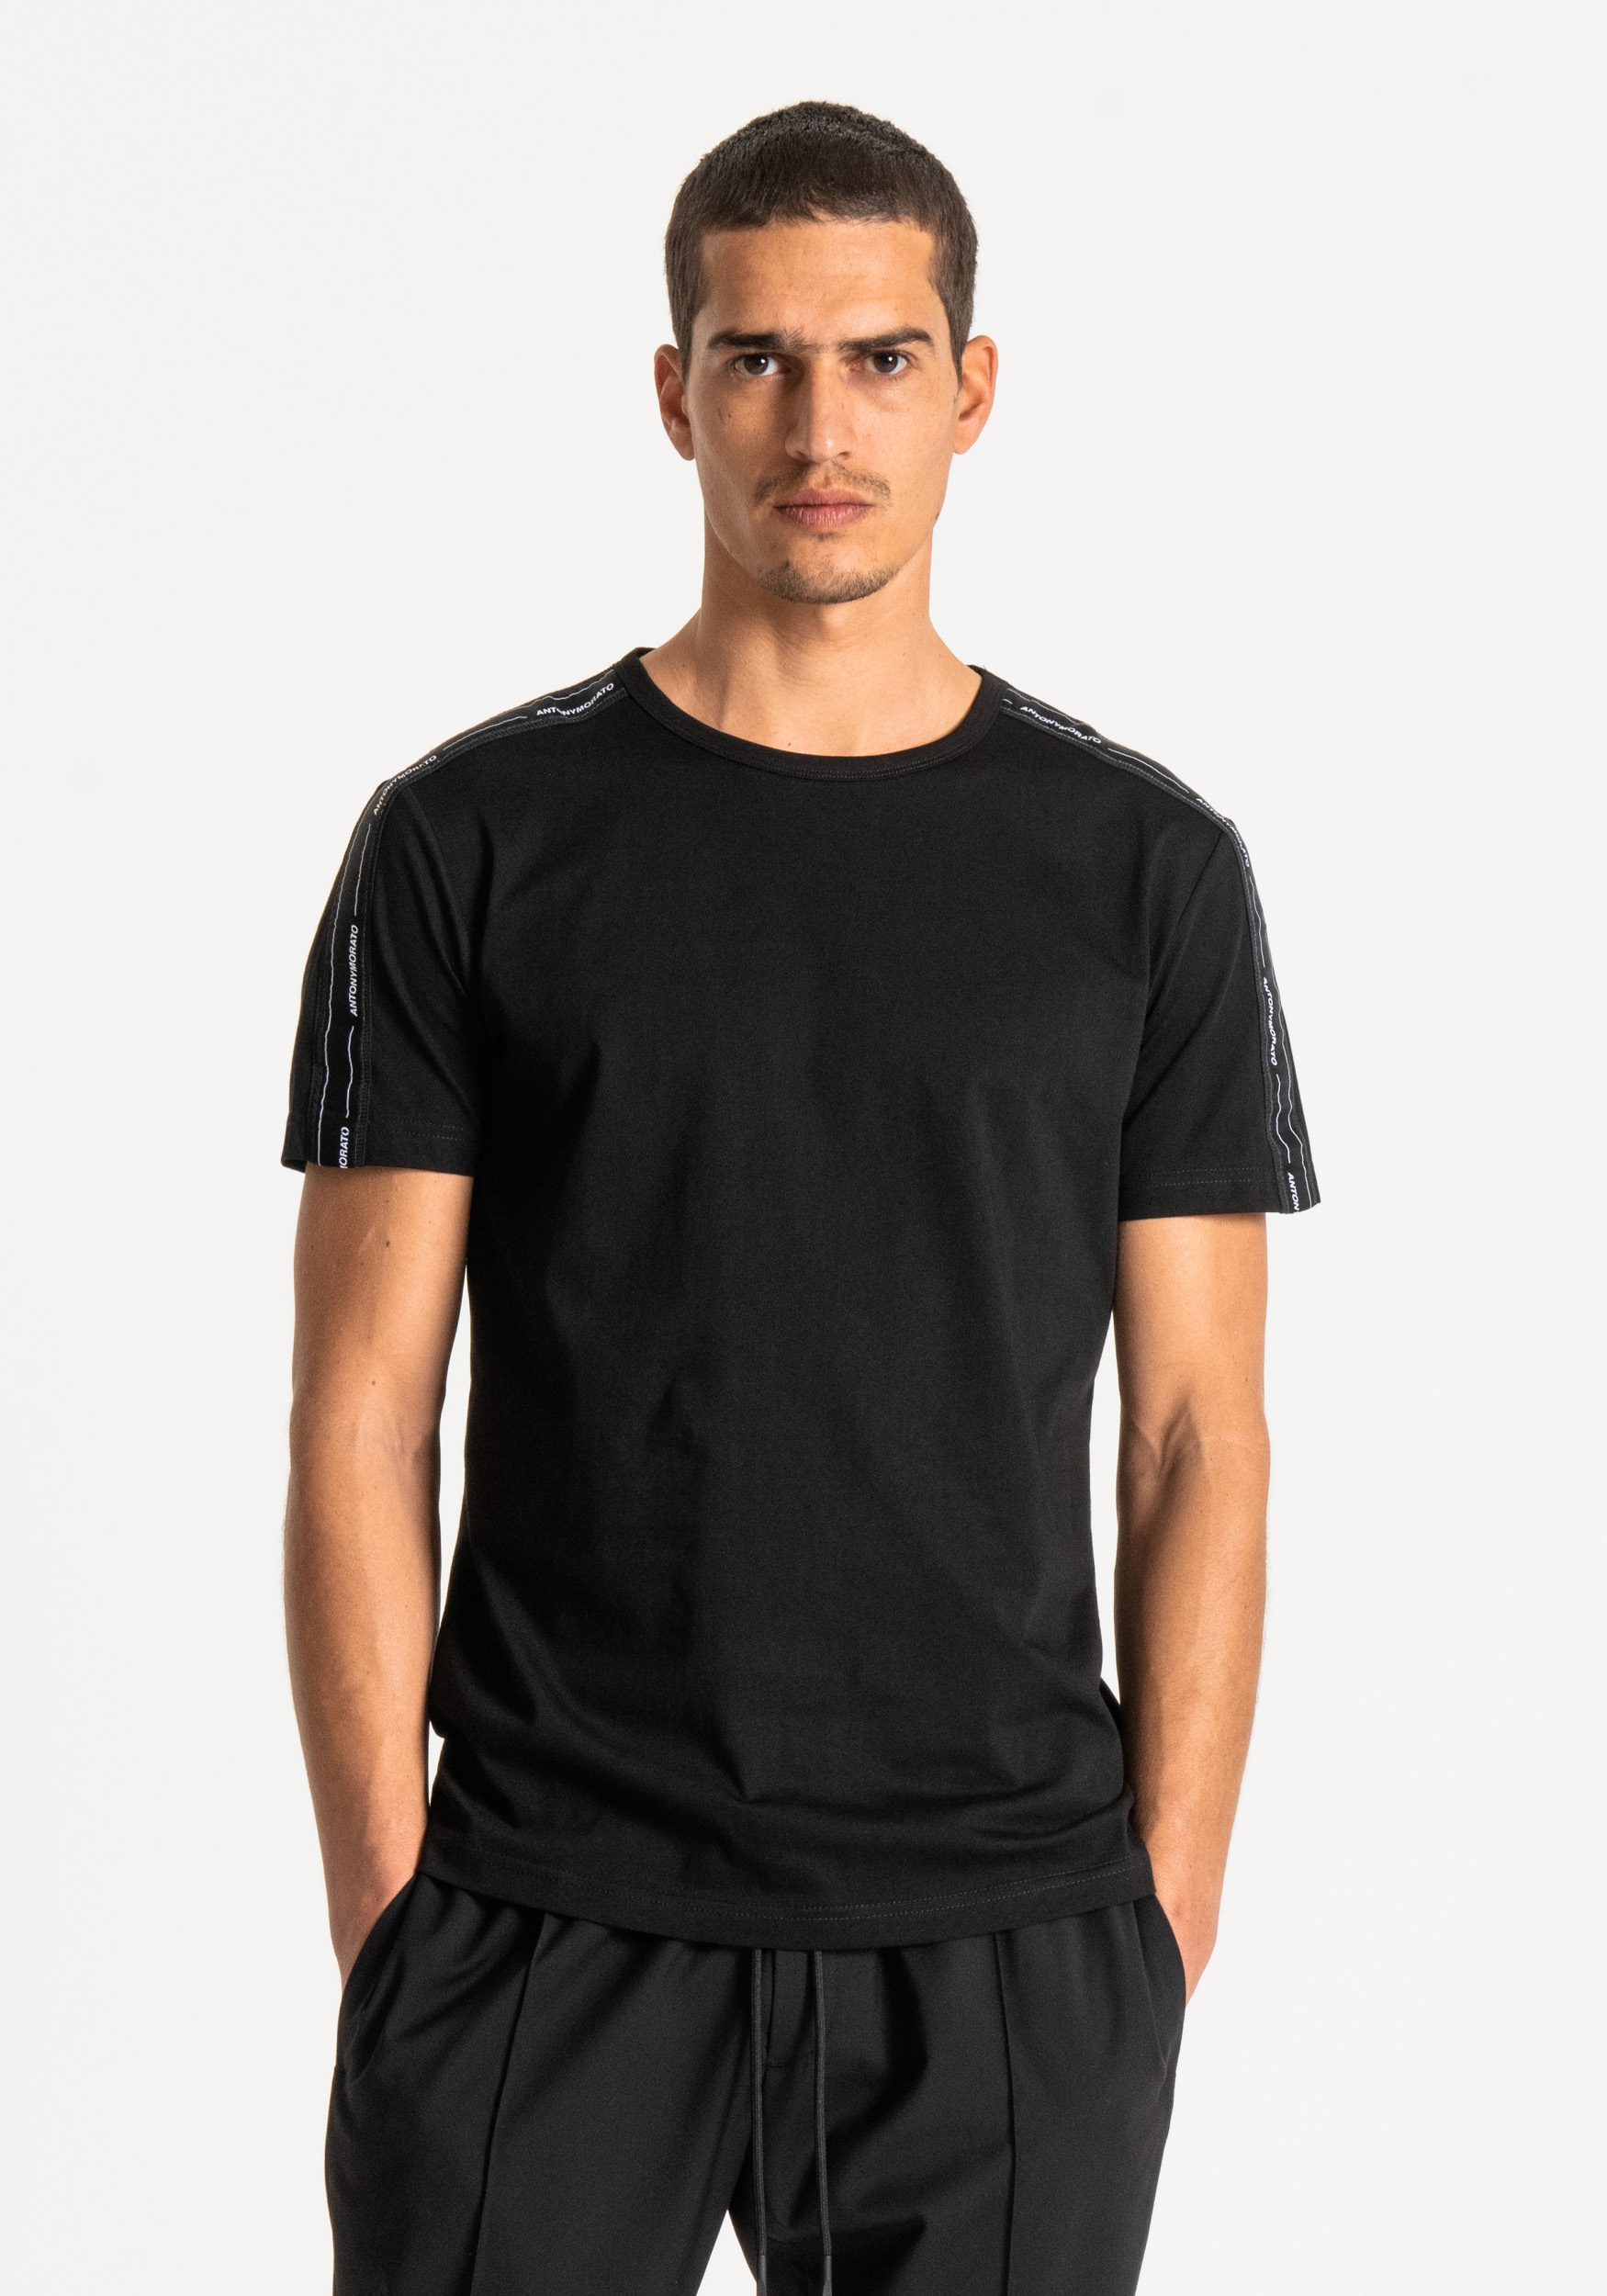 CREW-NECK T-SHIRT IN 100% COTTON WITH LOGO BAND DETAIL ON SLEEVES - Antony Morato Online Shop